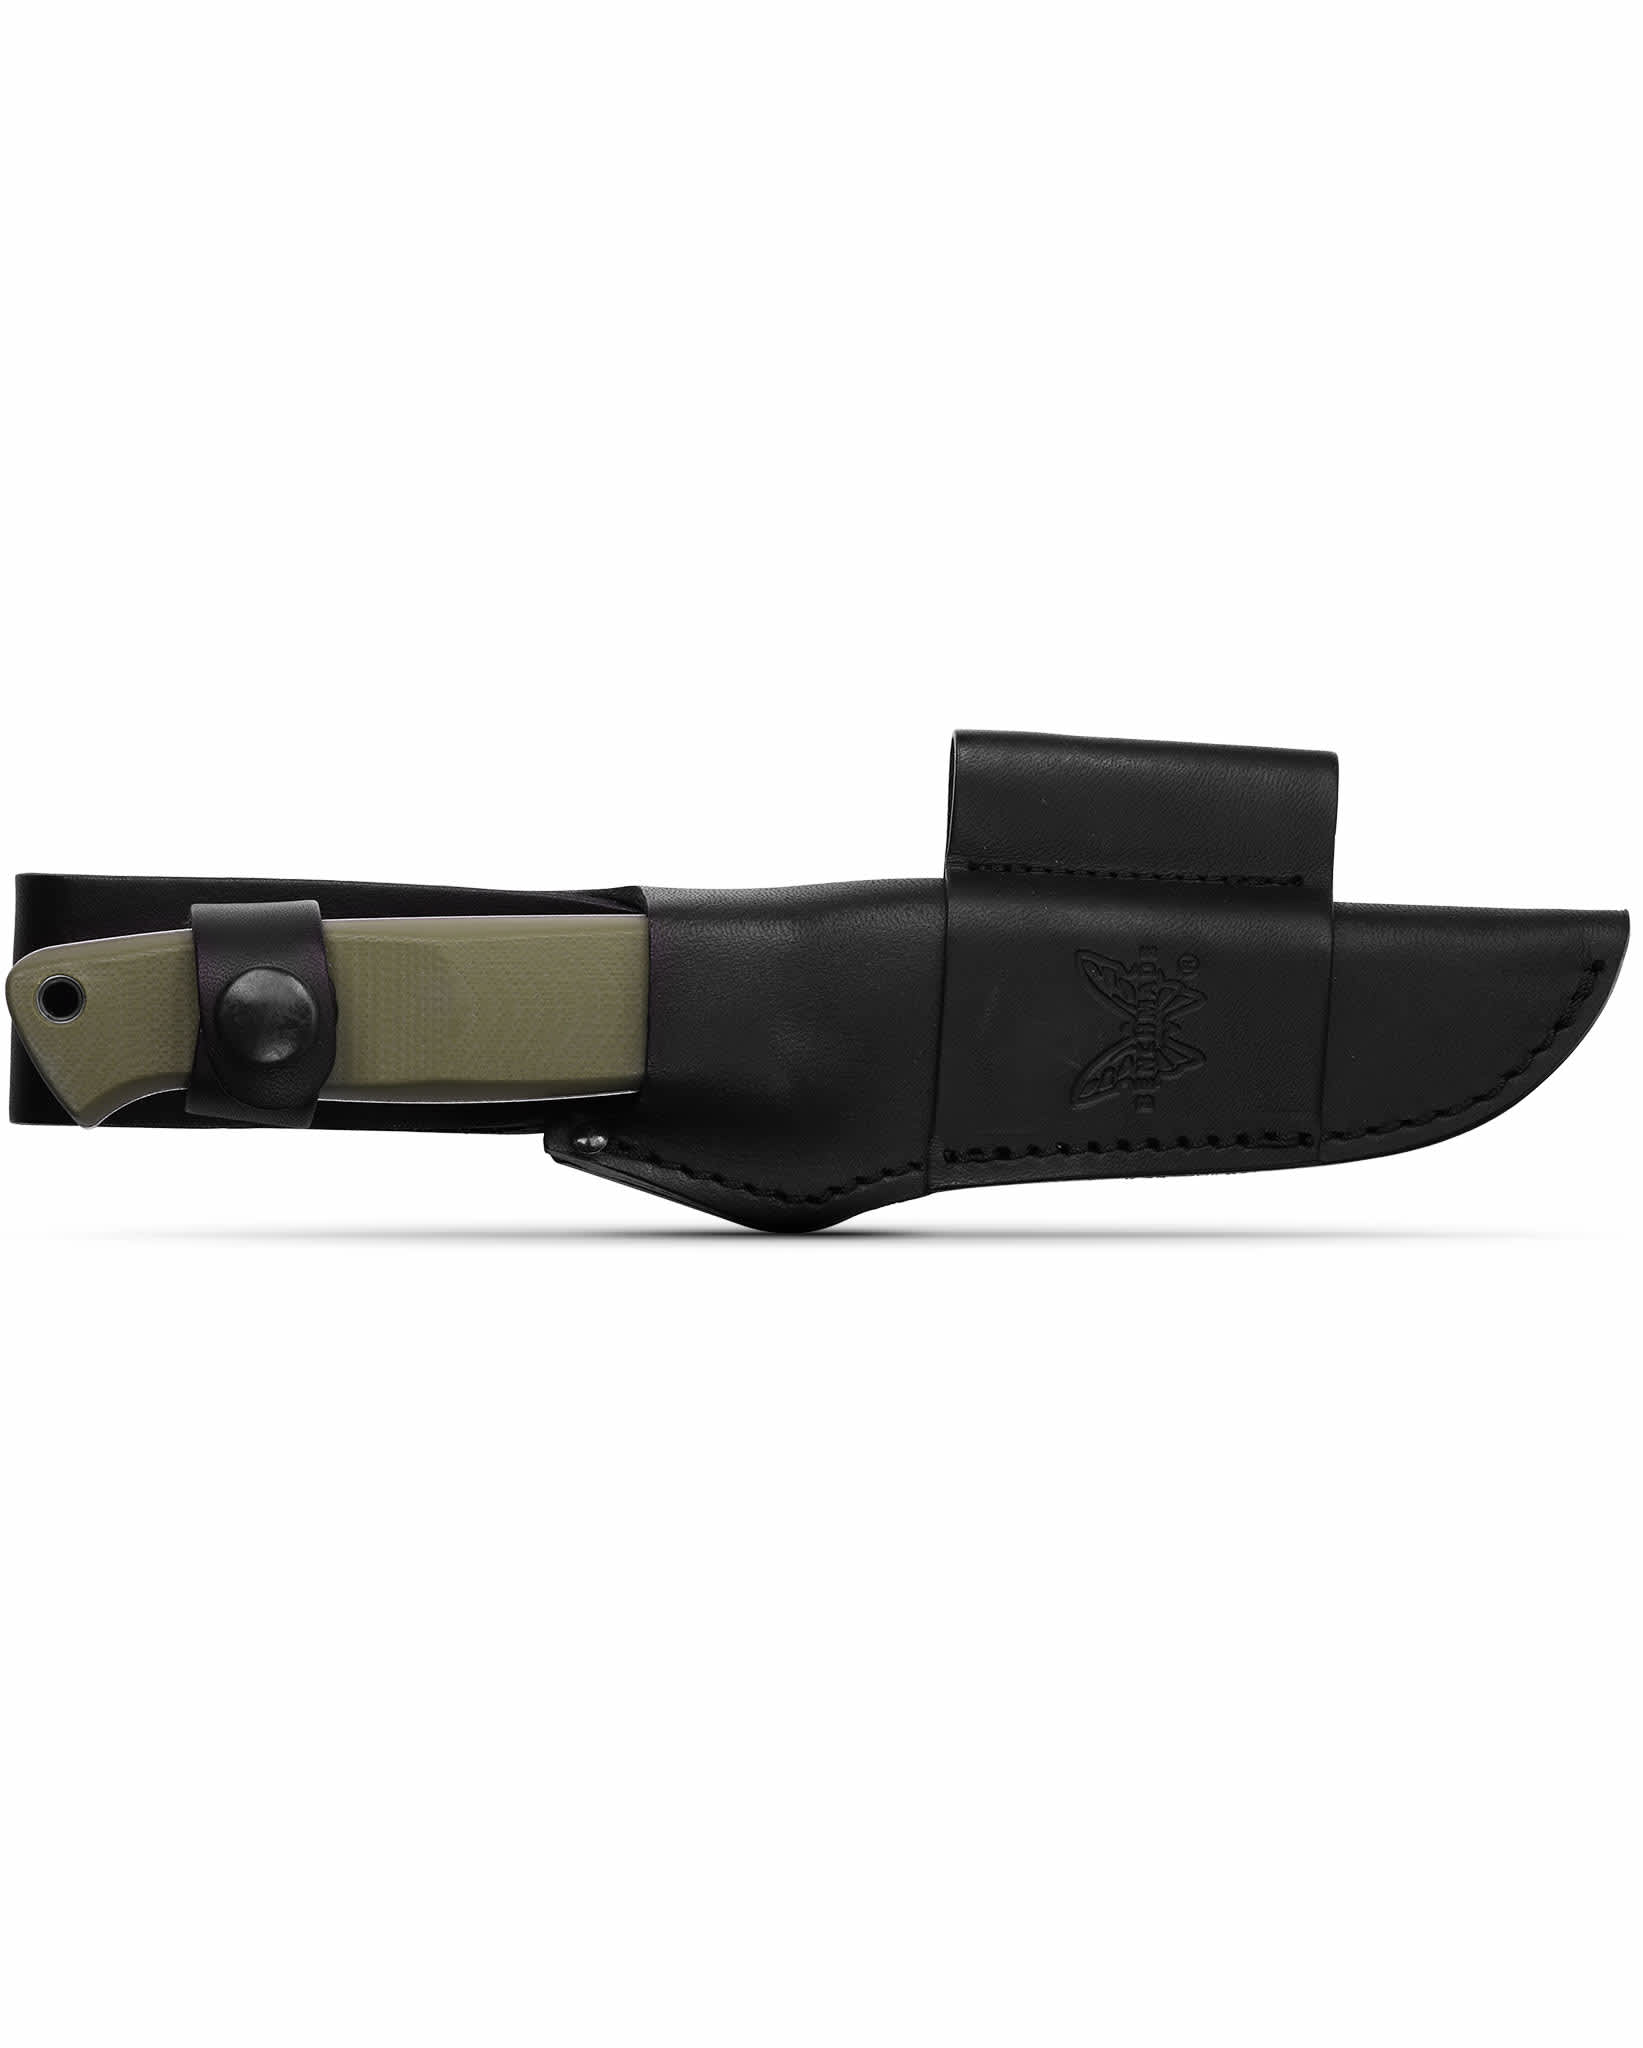 Benchmade® 163-1 Bushcrafter Fixed Blade Knife